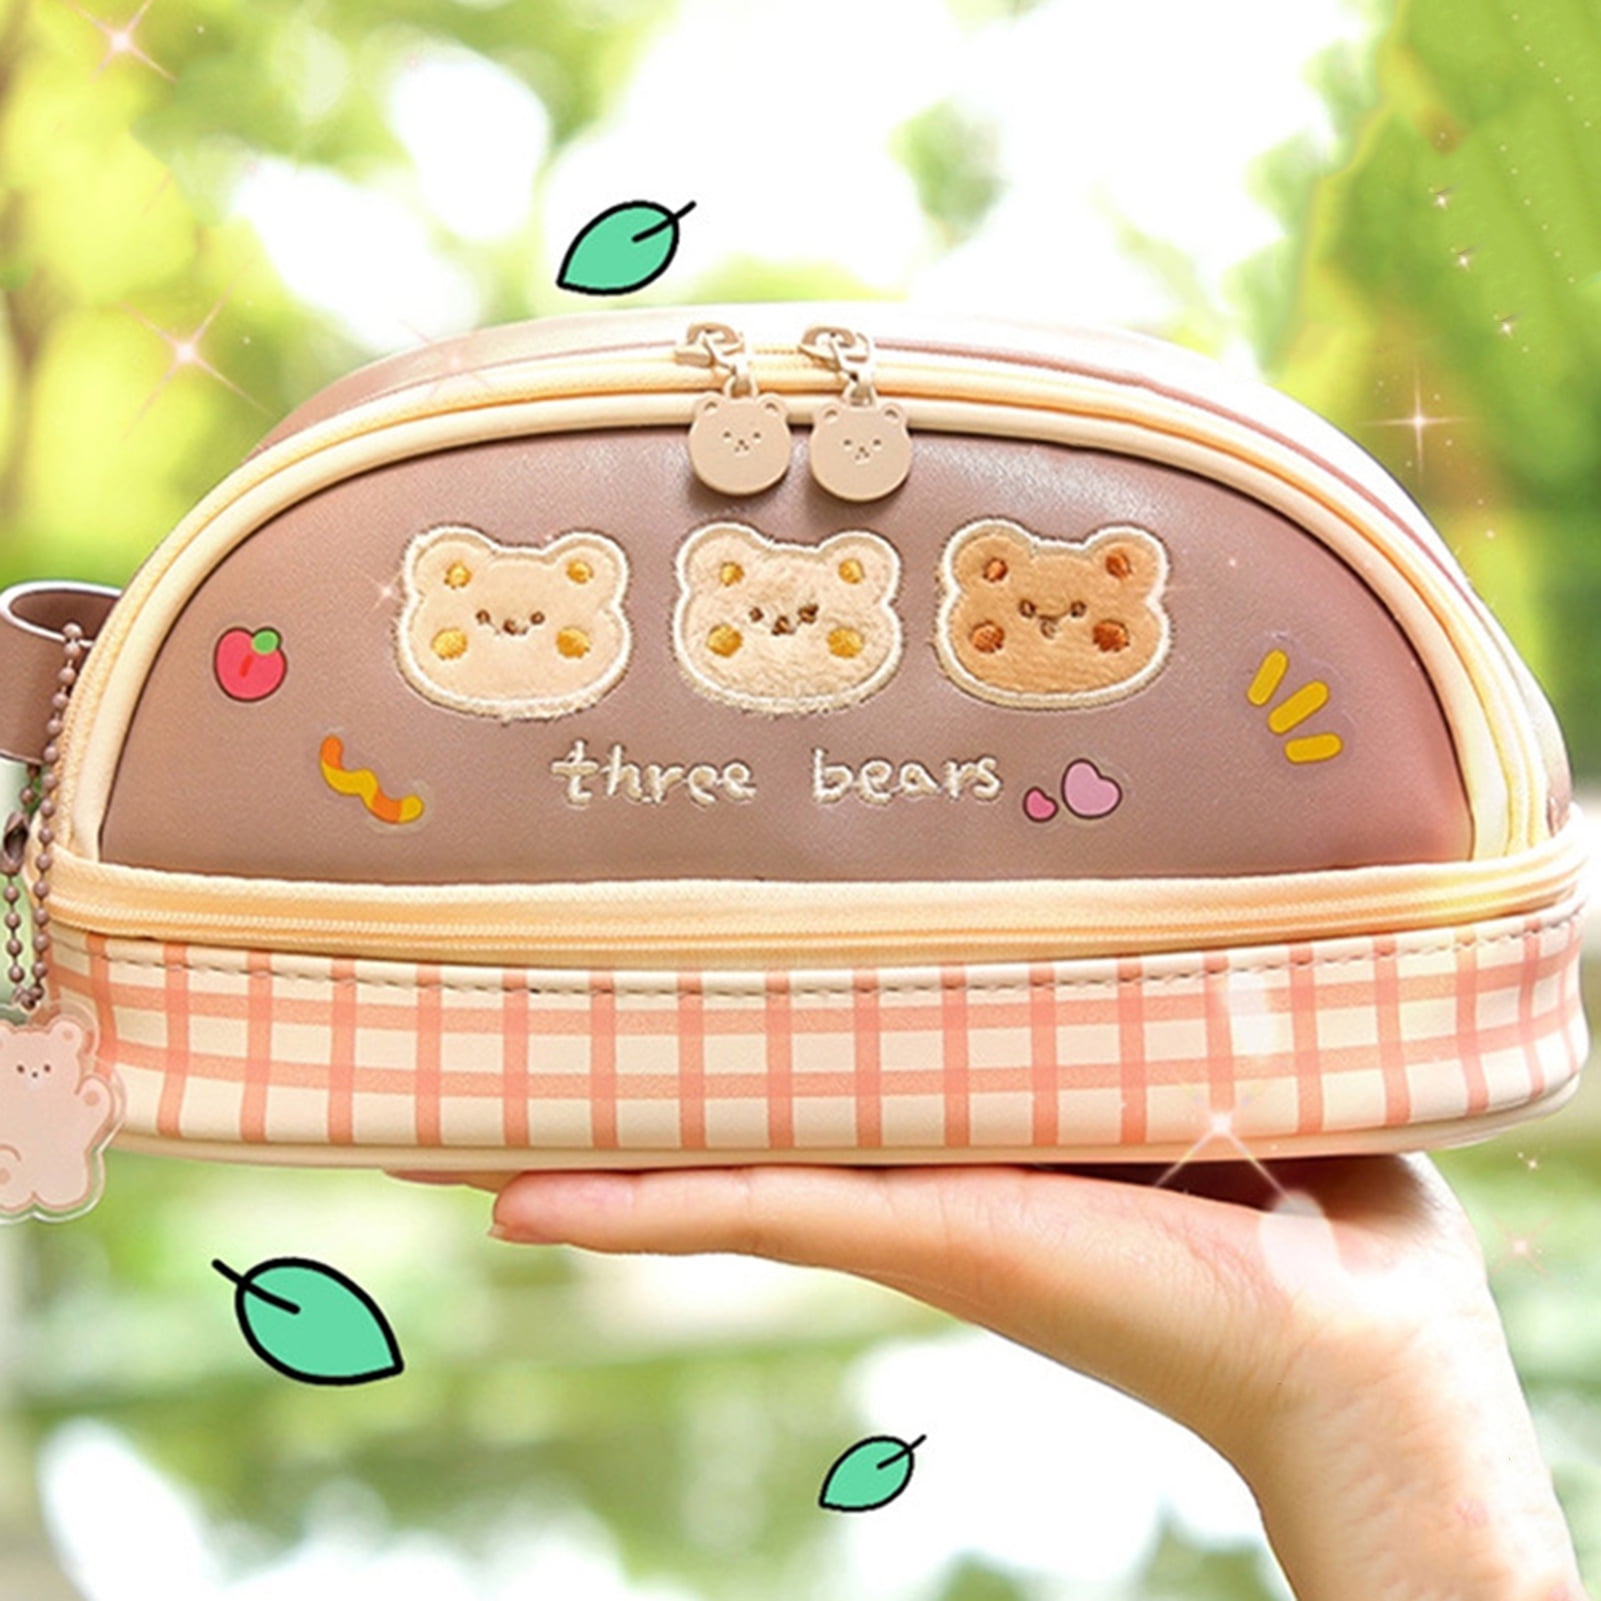 Two layer pencil cases for girls - Xiamen Fulllook Co., Limited